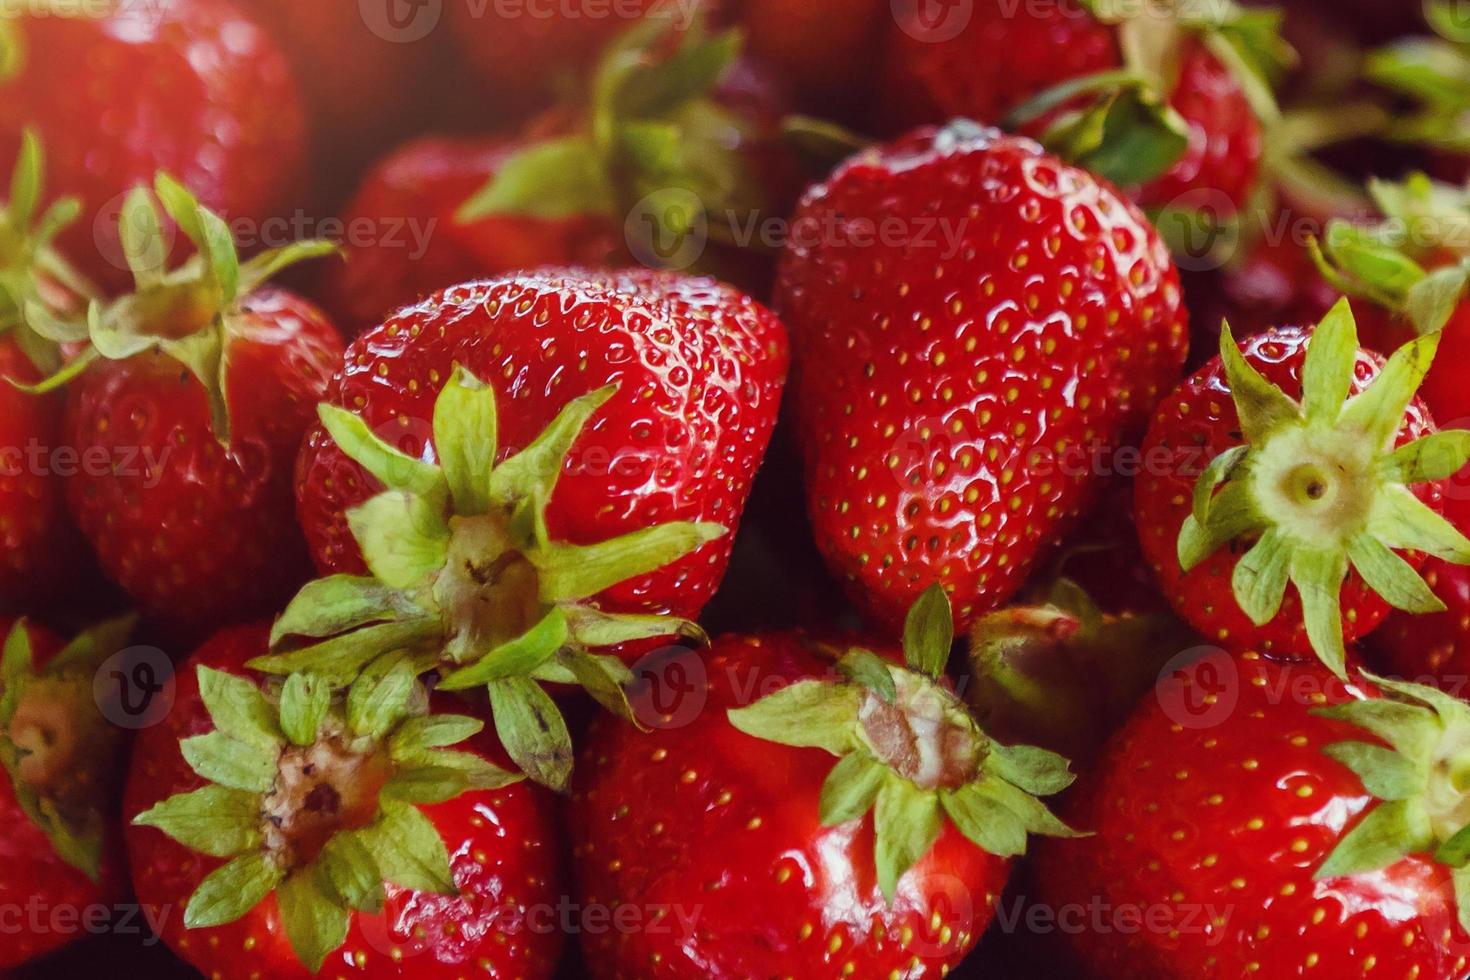 Background from freshly harvested strawberries, directly above photo